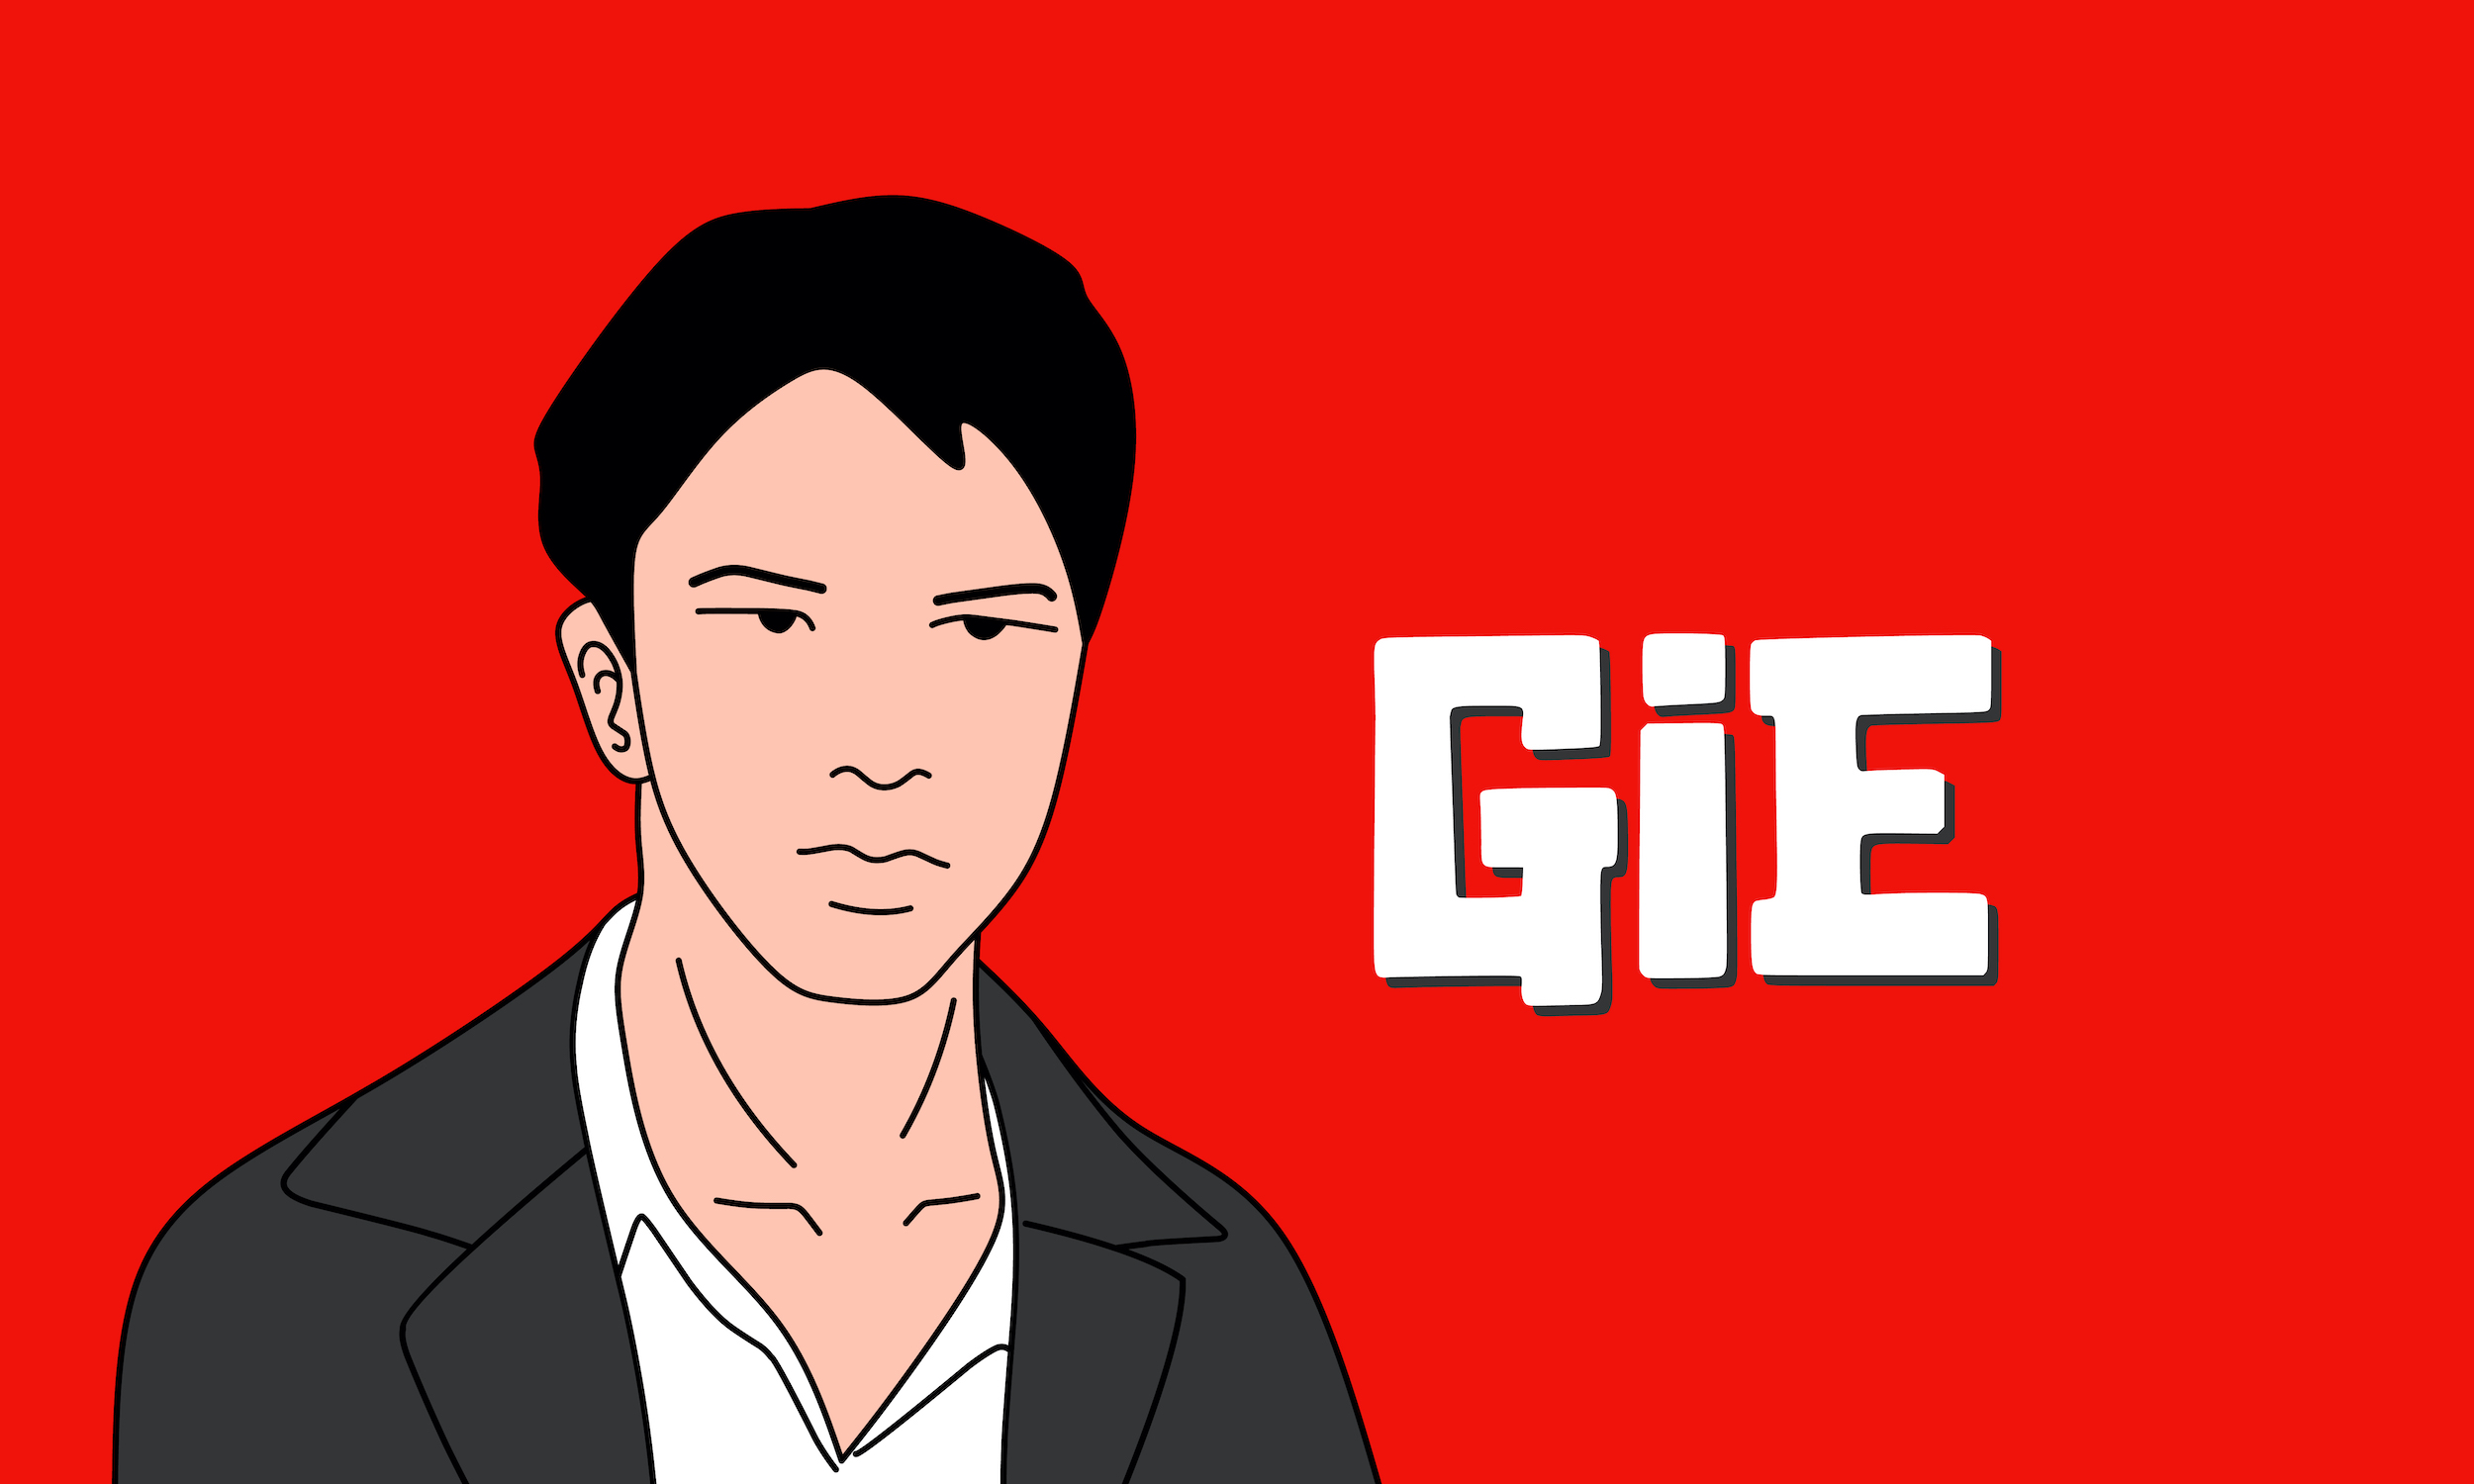 Gie Review